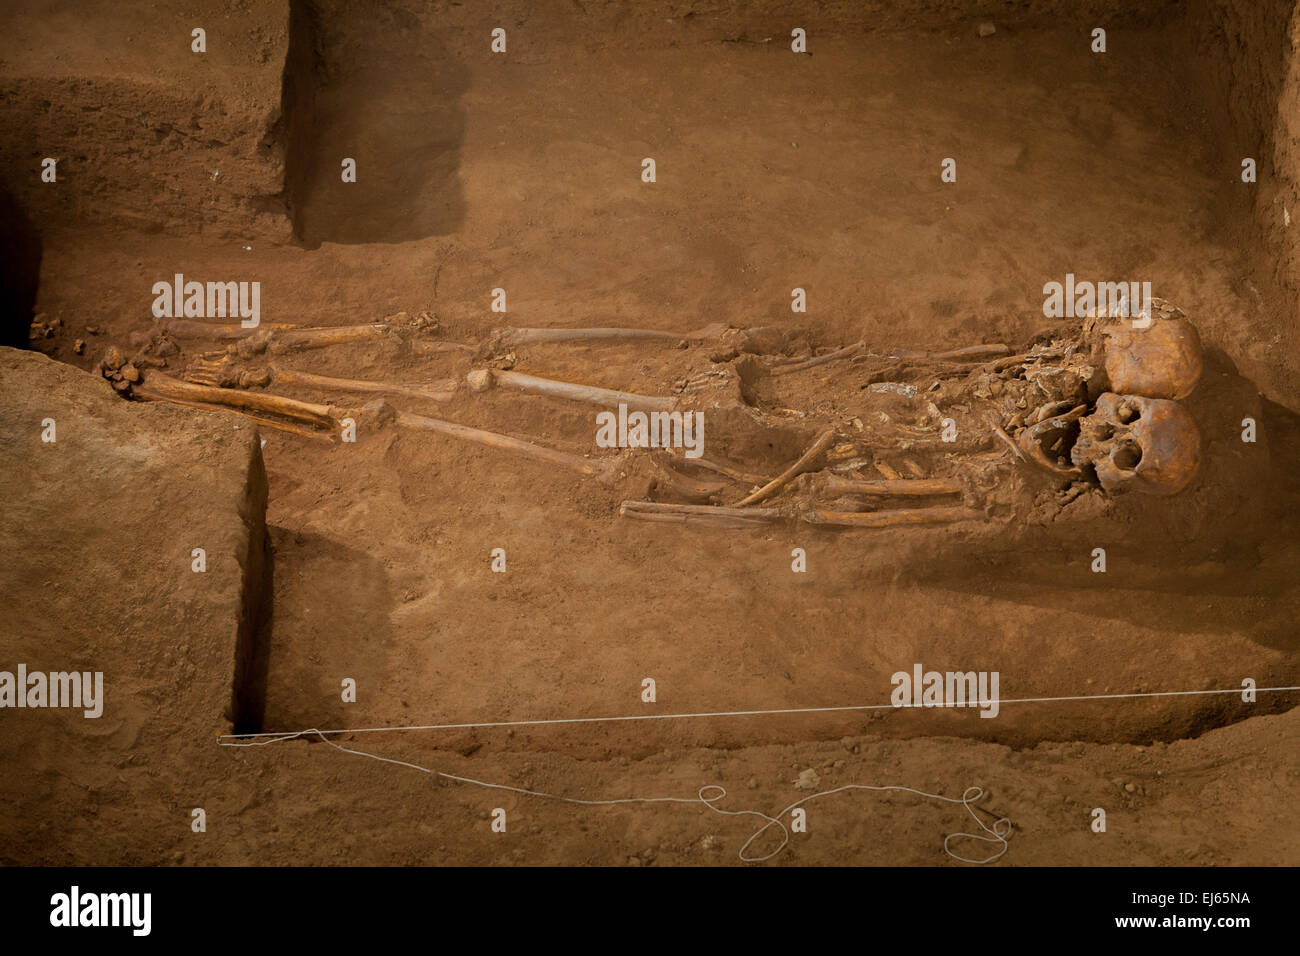 Prehistoric mongoloid skeletons at Gua Harimau (literally: tiger cave), an archaeological site in Padangbindu, South Sumatra, Indonesia. Stock Photo